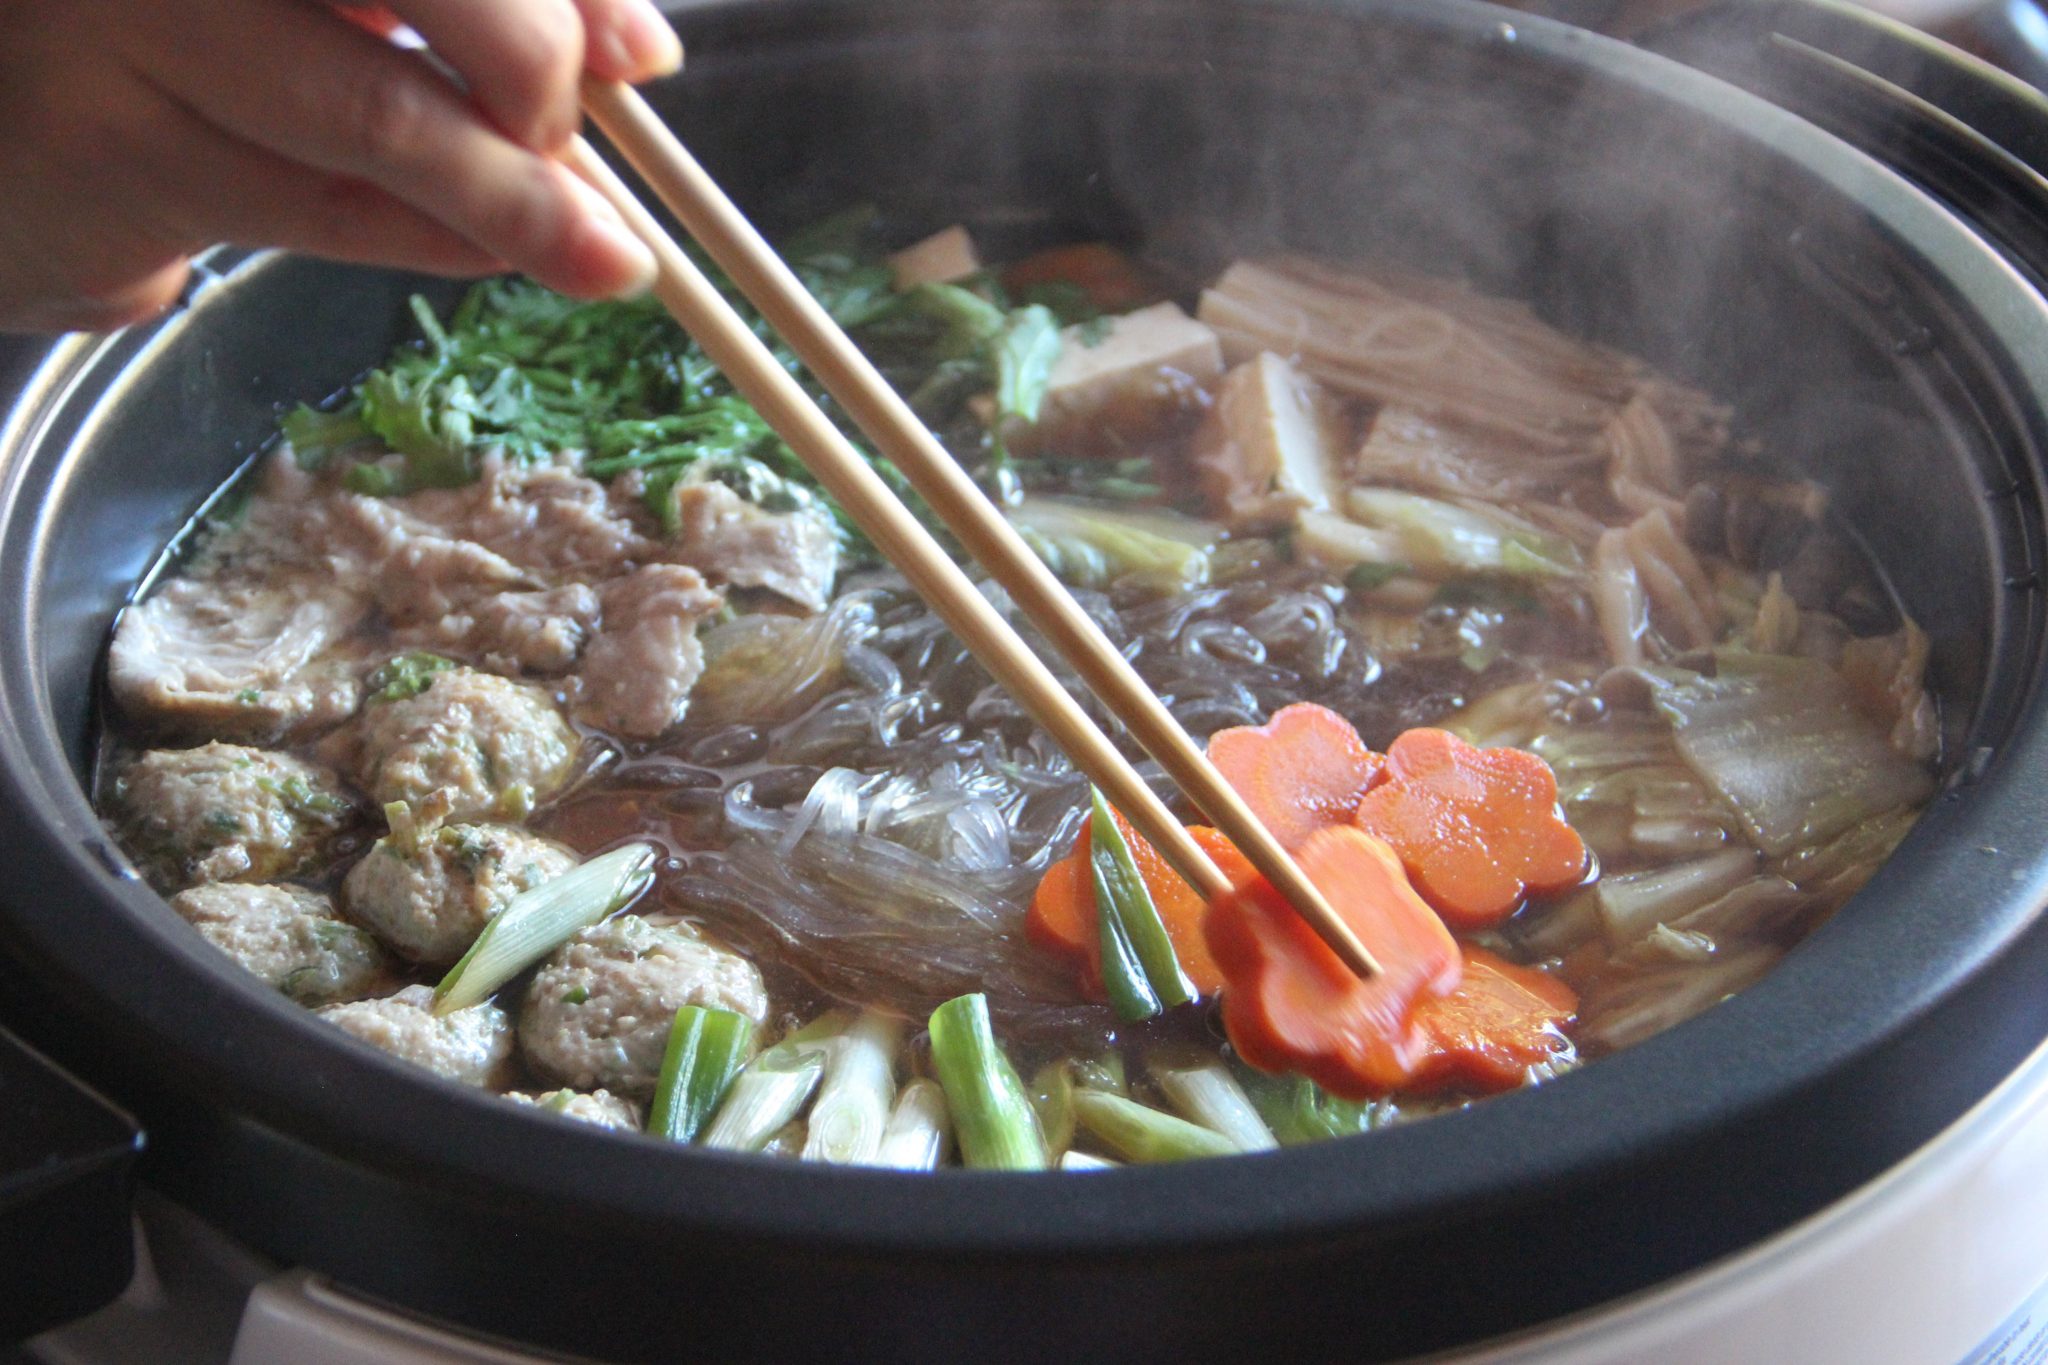 The nabe (Japanese-style hot pot) dishes that bring people together in the  Japanese winter, Taste of Japan